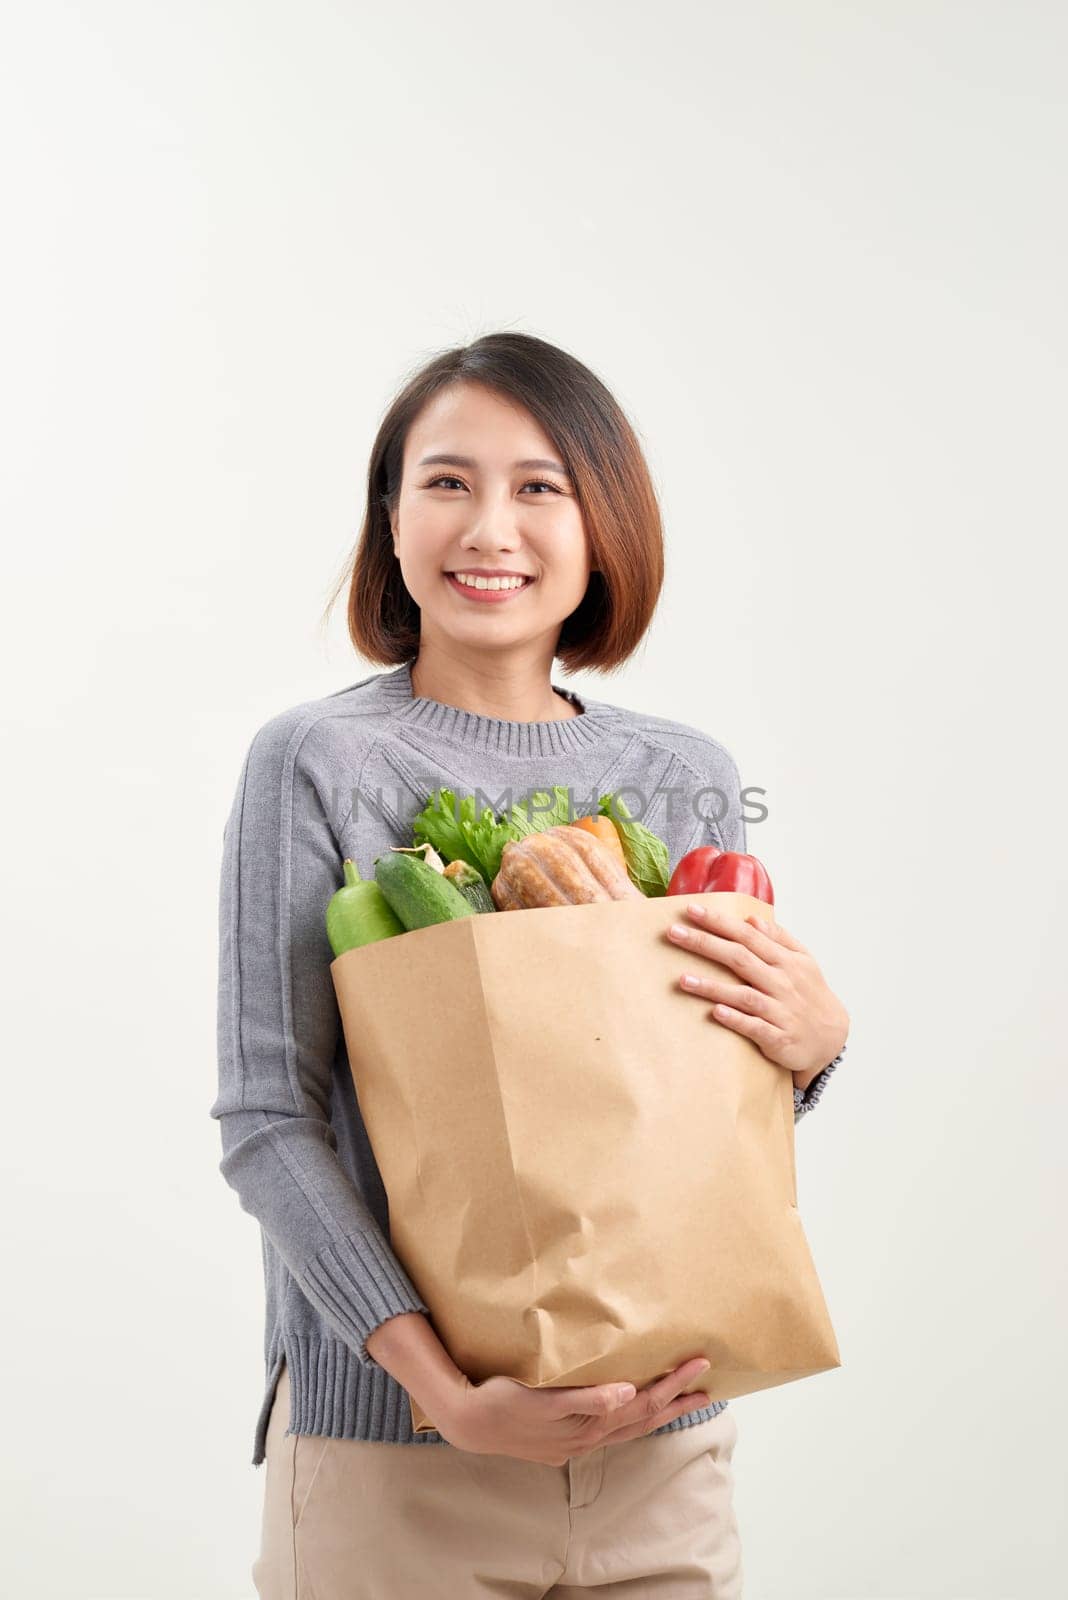 Beautiful young woman in apron holding paper shopping bag full of fresh vegetables and smiling